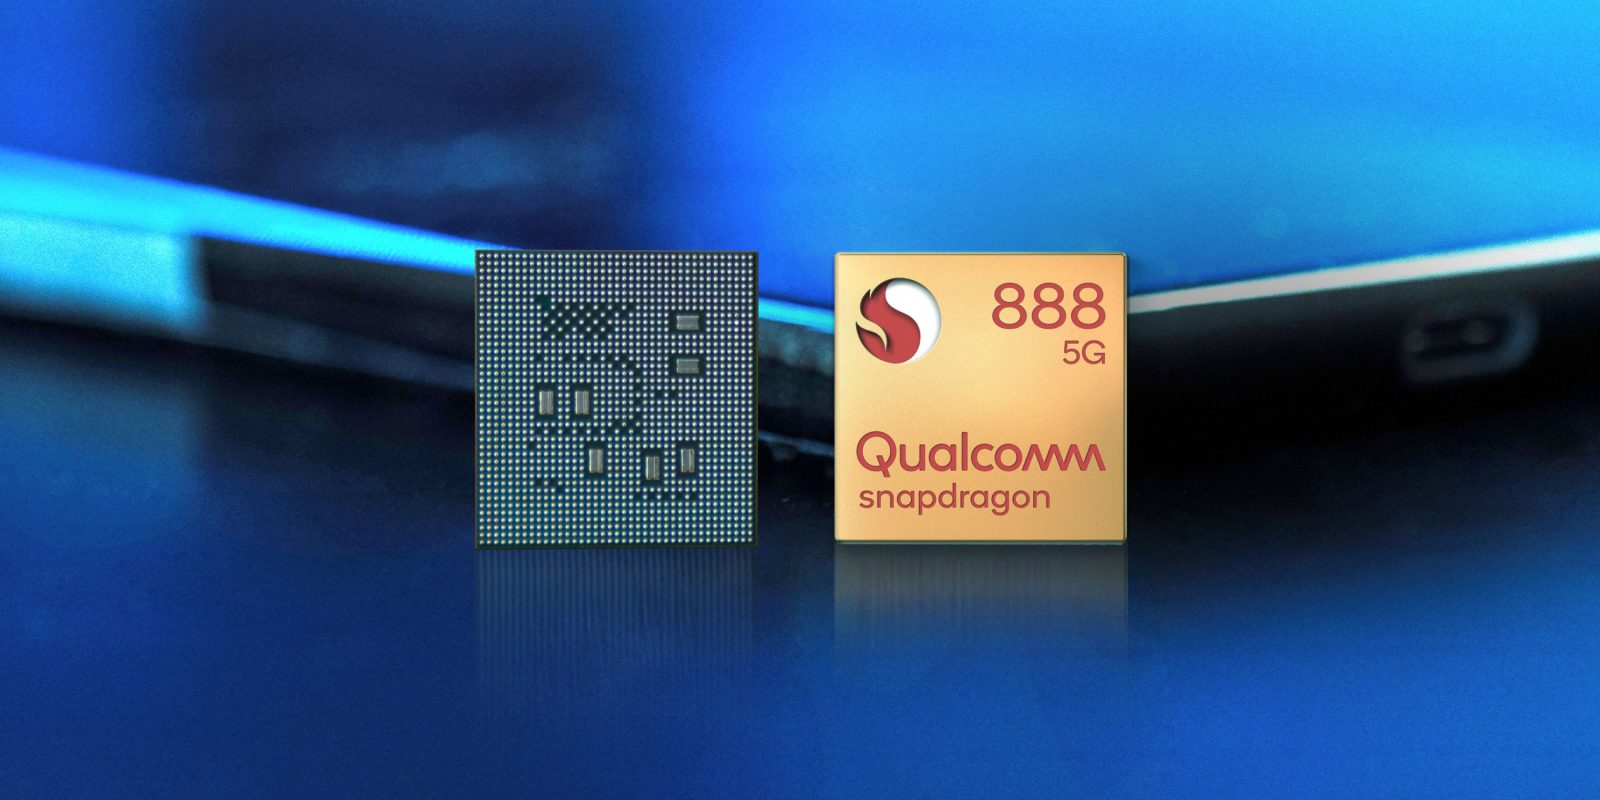 qualcomm-Snapdragon-888-processeur-smartphone-android